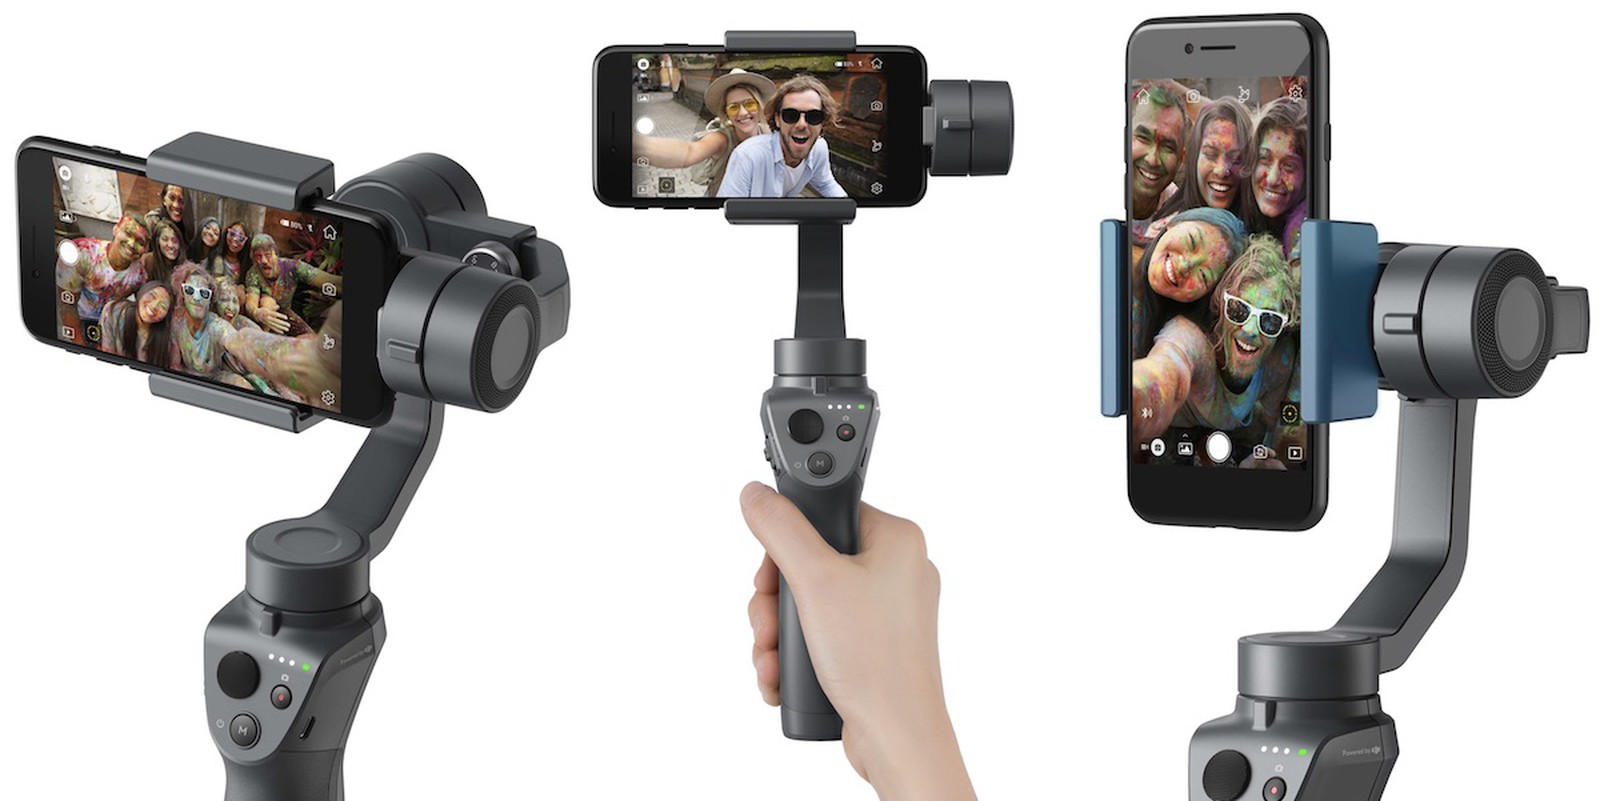 CES 2018: DJI Announces Osmo Mobile 2 With Simpler Controls and